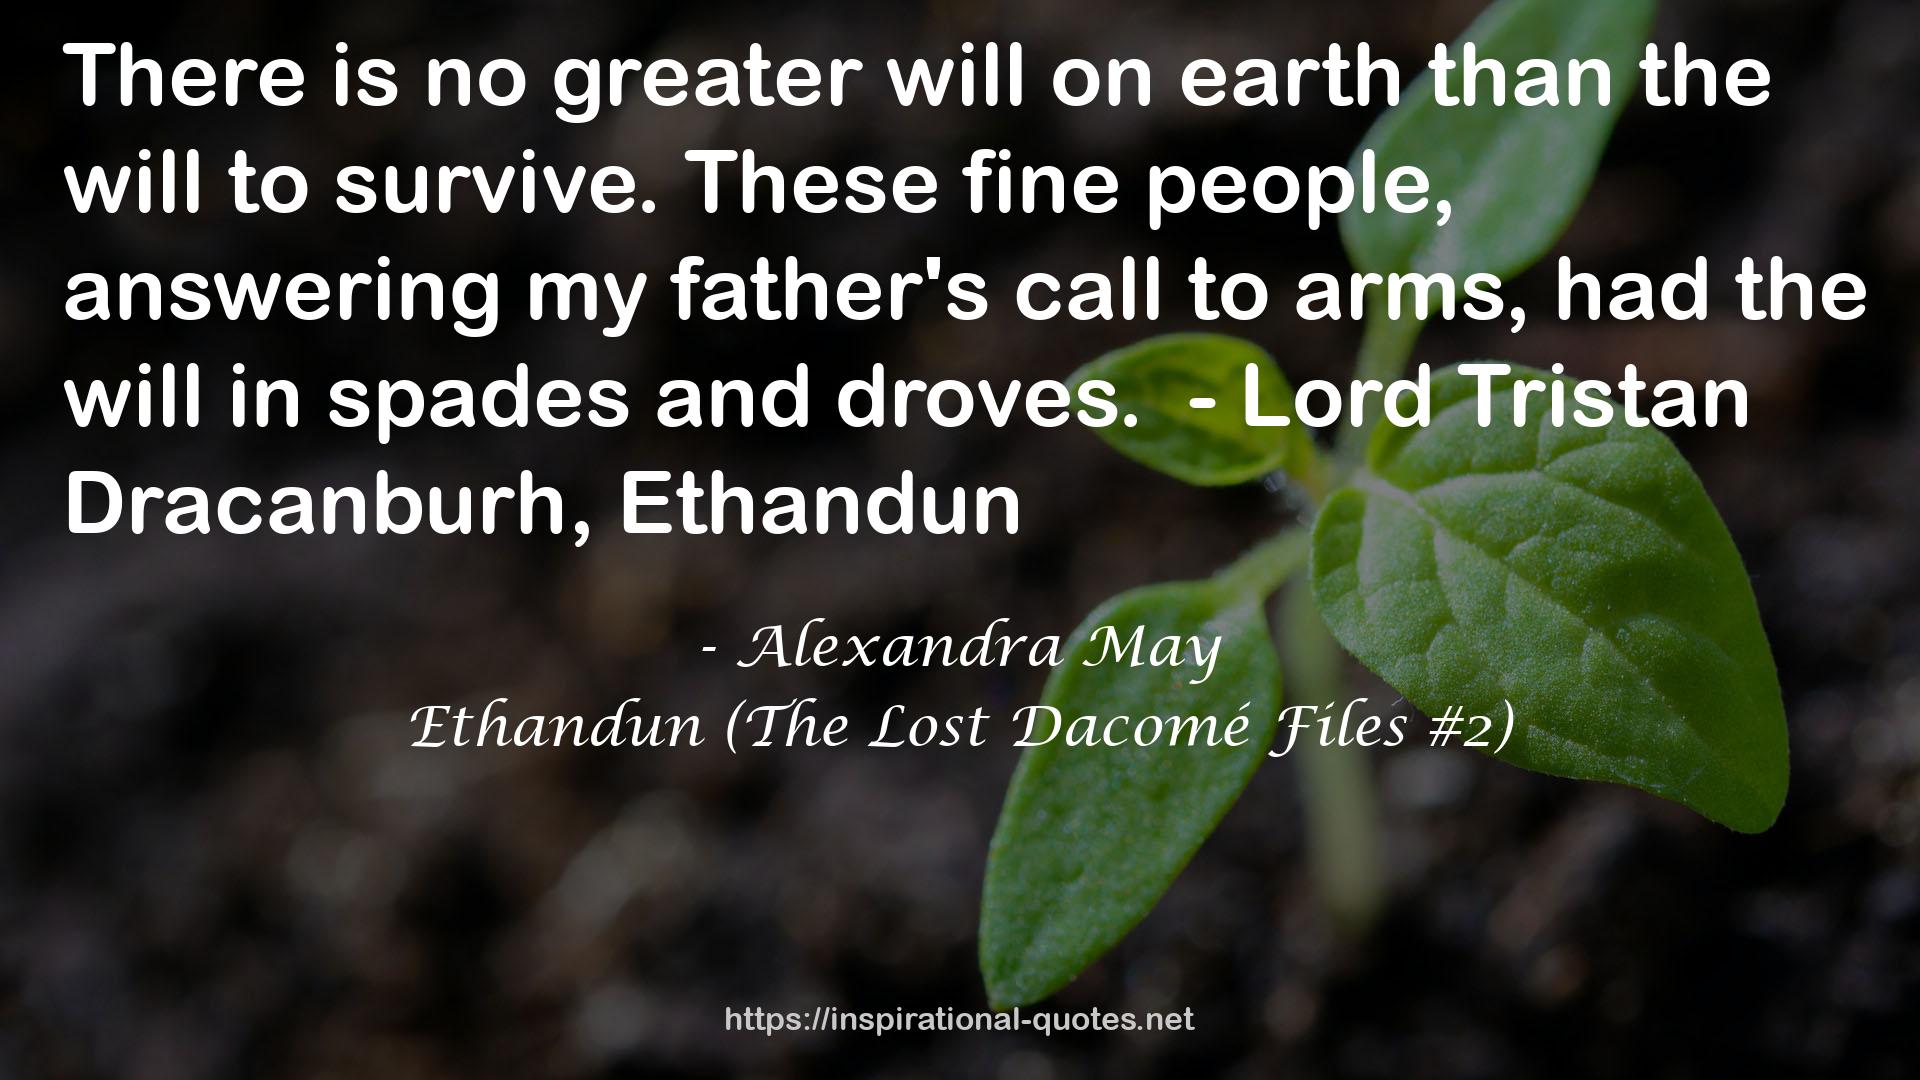 Ethandun (The Lost Dacomé Files #2) QUOTES